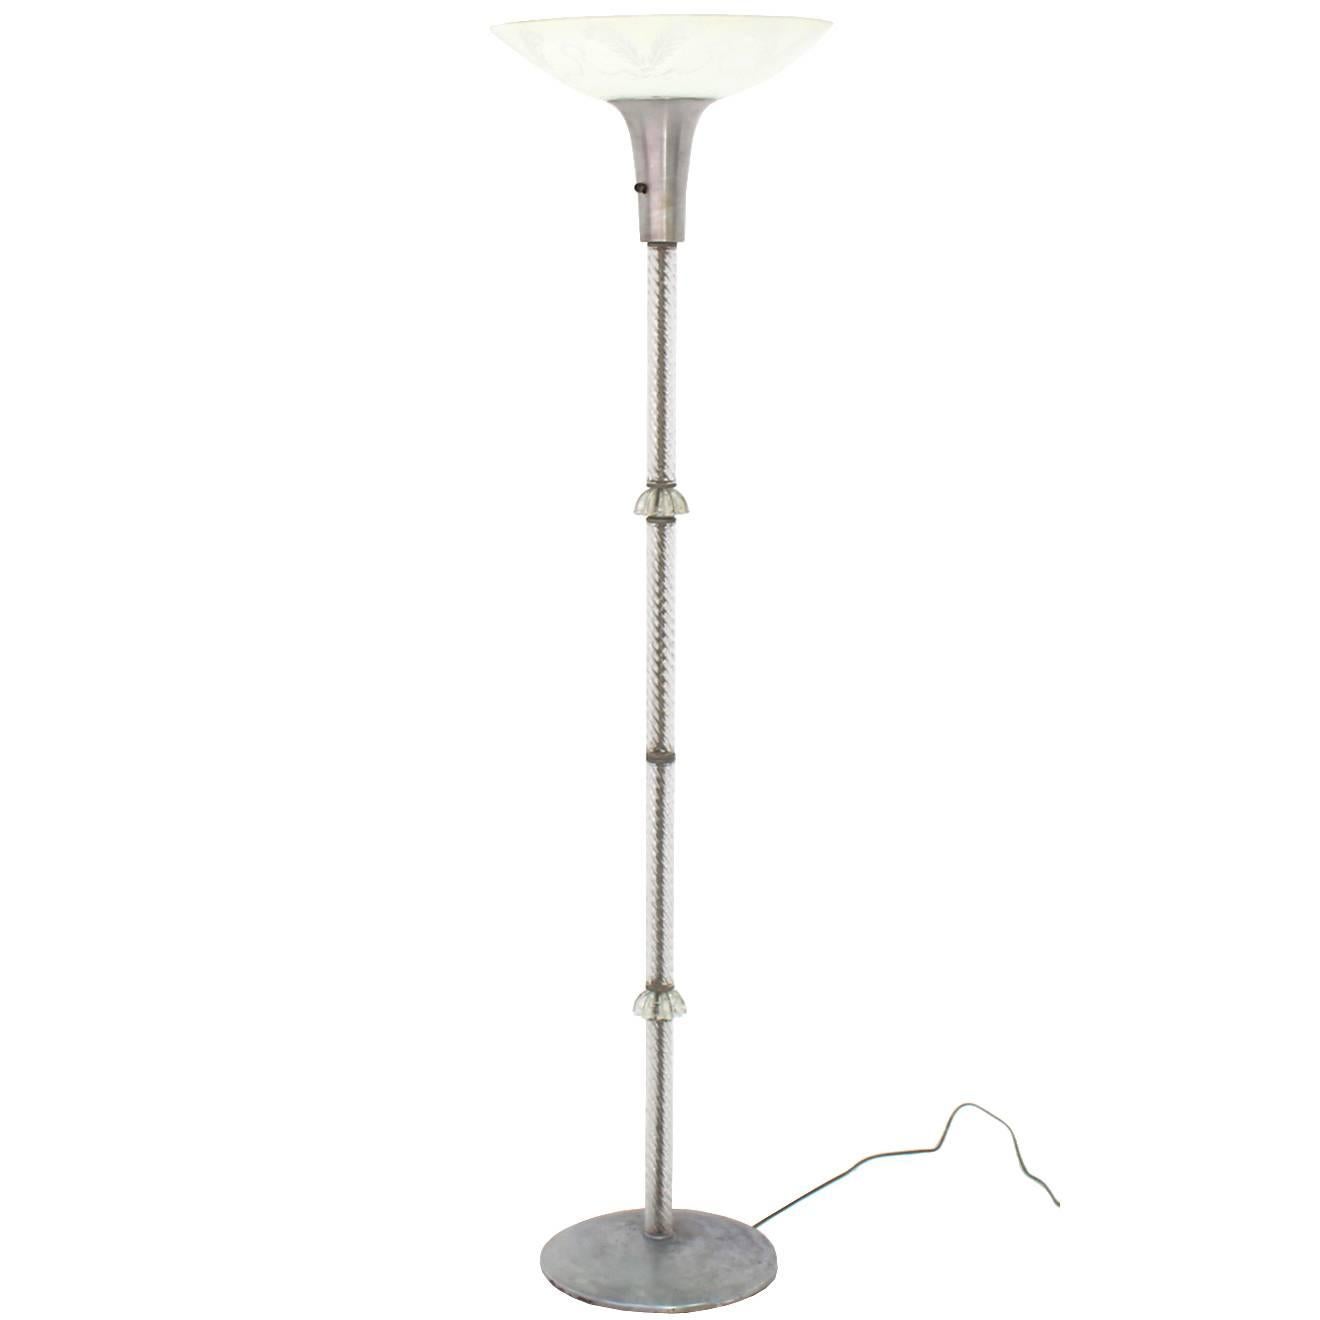 Twisted Glass Pole Floor Lamp For Sale